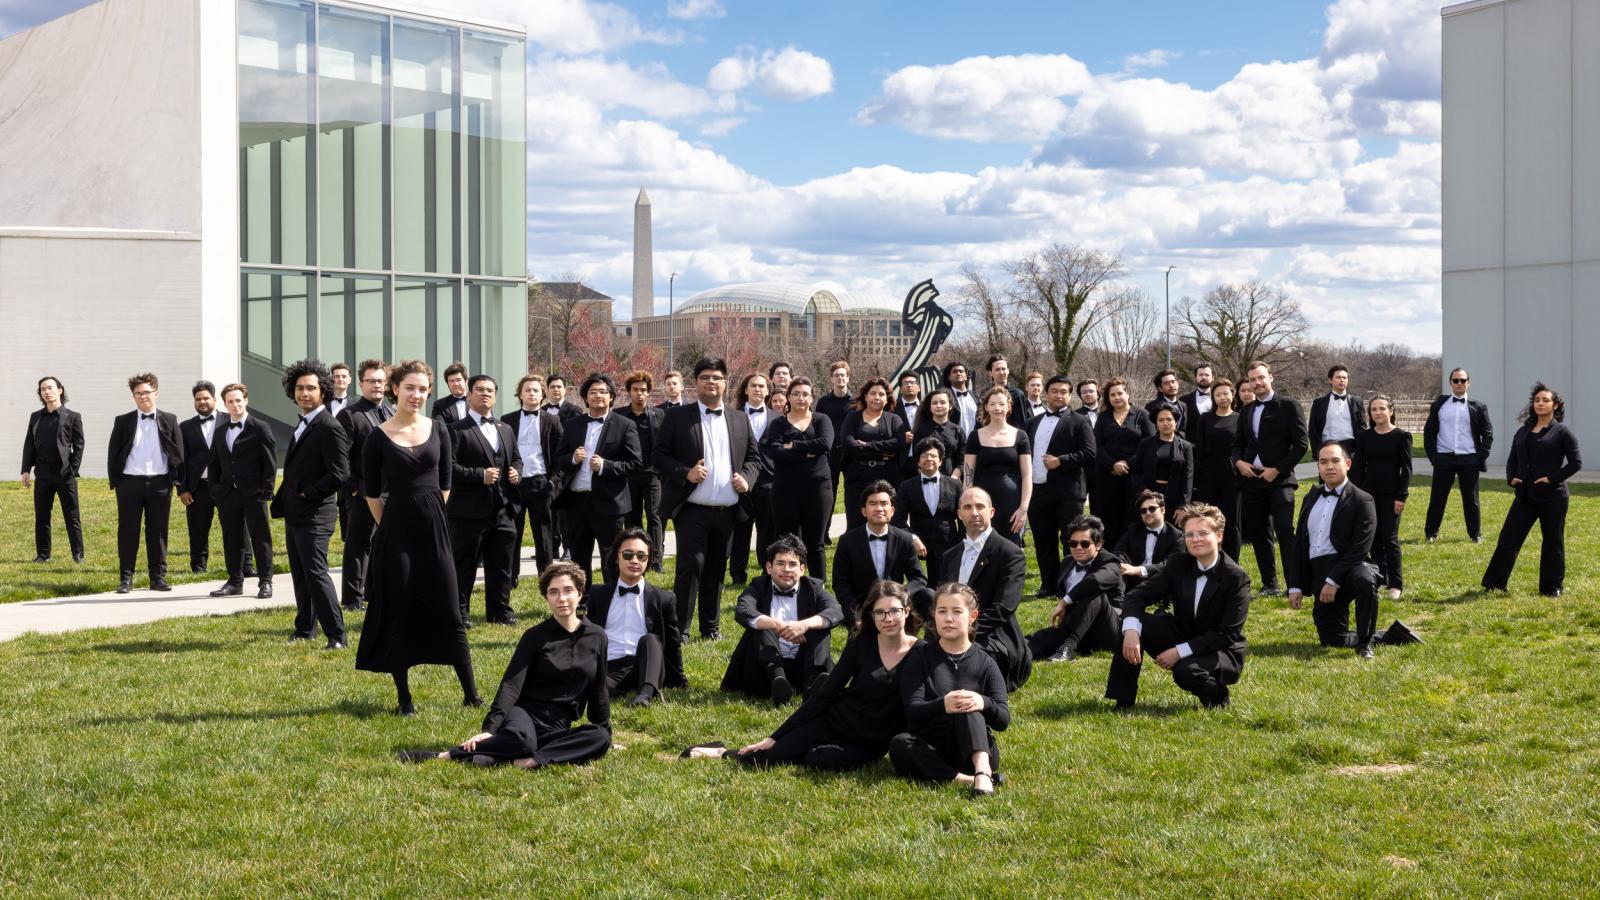  Wind Symphony Members pose on a grass lawn in Washington D.C.